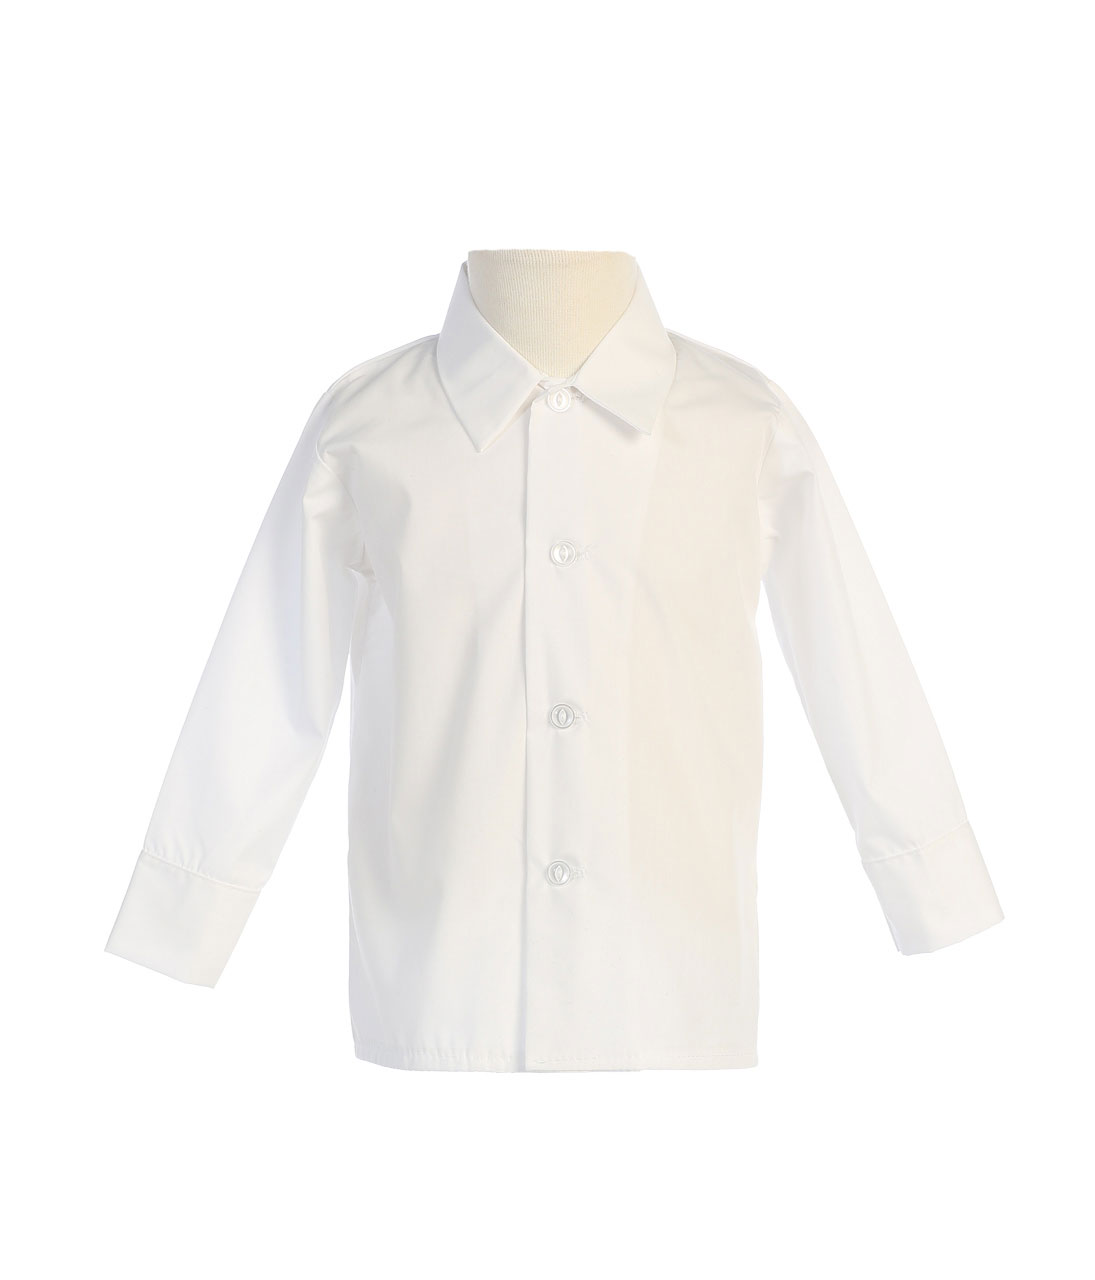 Boys Long Sleeved Simple Dress Shirt - Available in White L